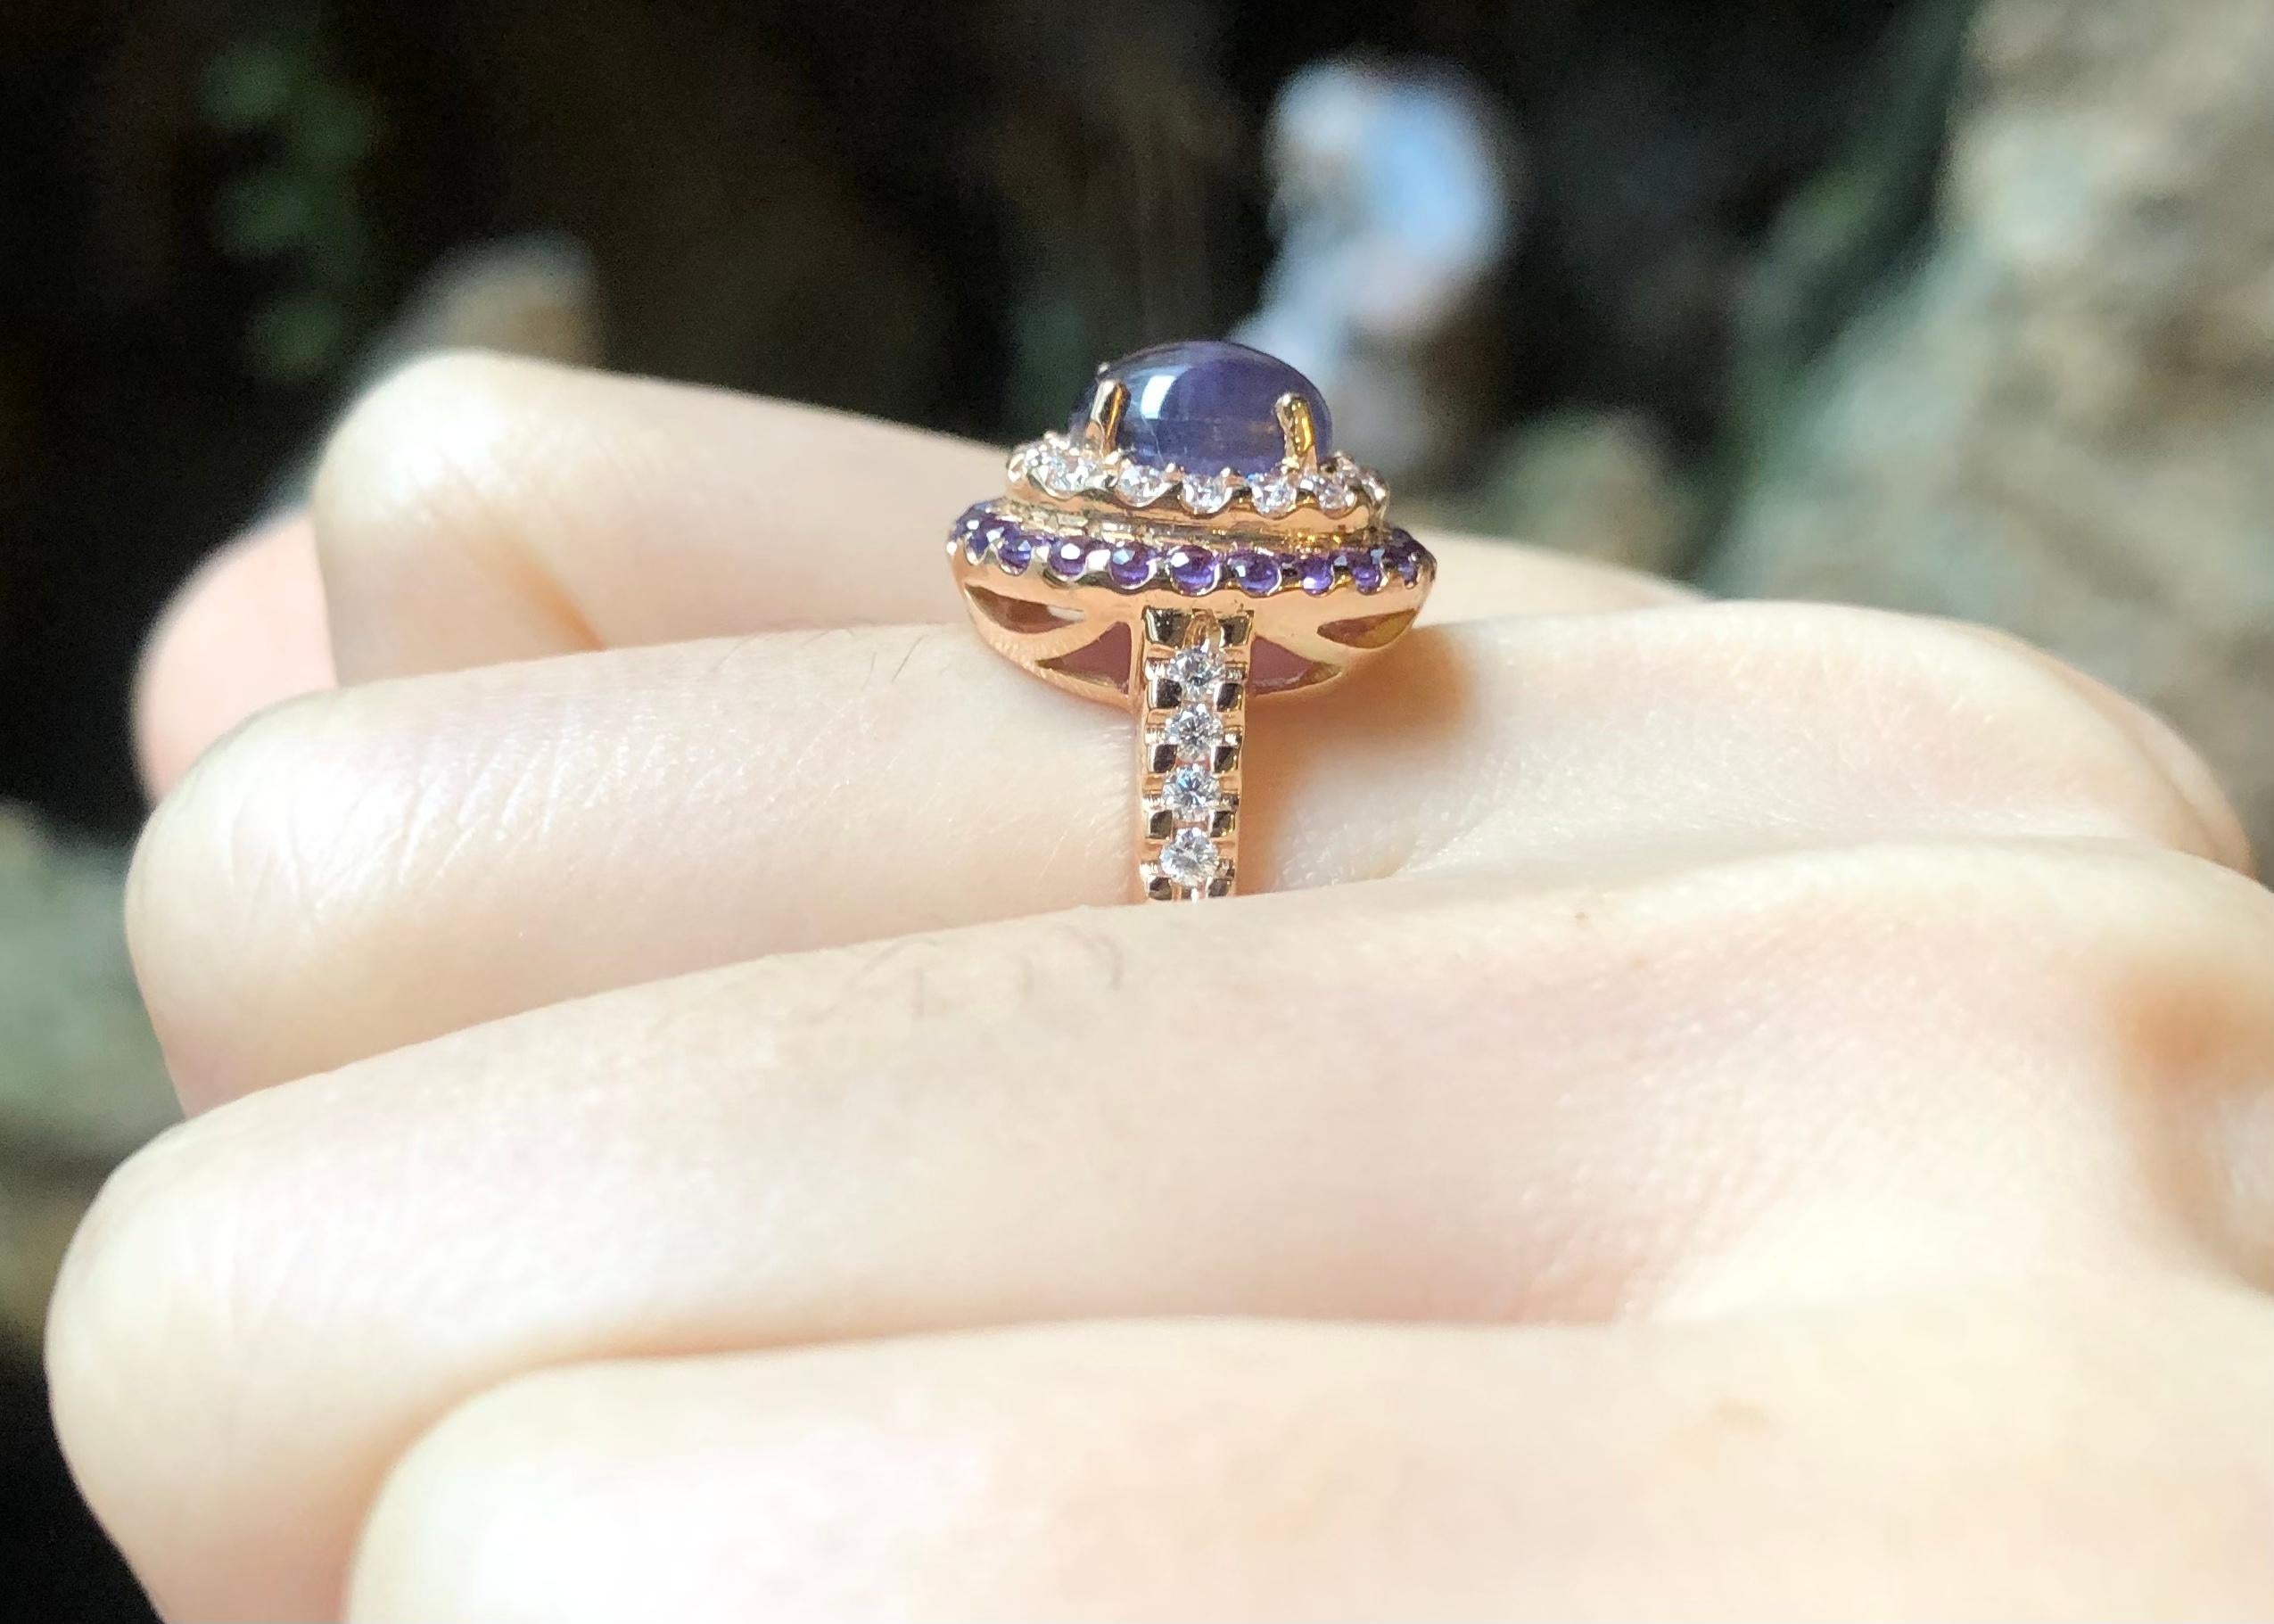 Purple Star Sapphire 2.50 carats, Purple Sapphire 0.59 carat and Diamond 0.36 carat Ring set in 18K Rose Gold Settings

Width:  1.2 cm 
Length: 1.4 cm
Ring Size: 53
Total Weight: 6.0 grams

